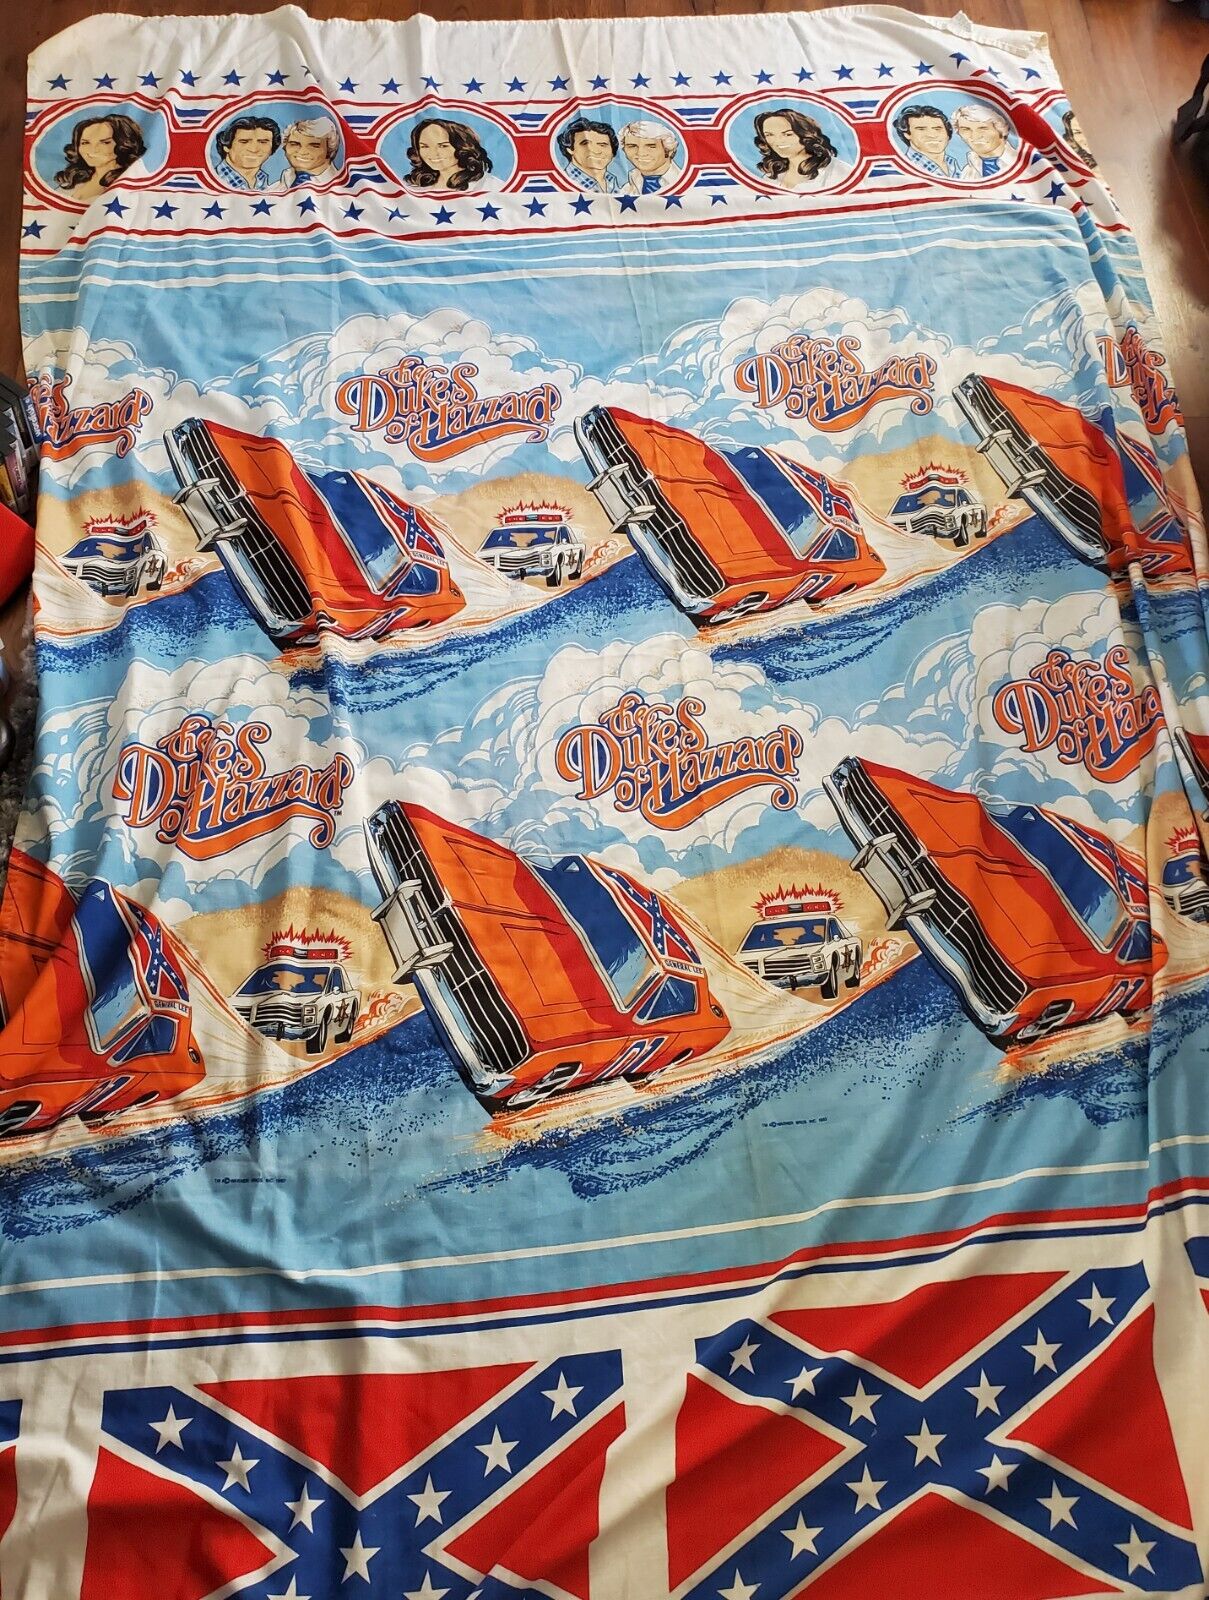 Dukes of Hazzard Vintage TWIN Top Bed Sheet